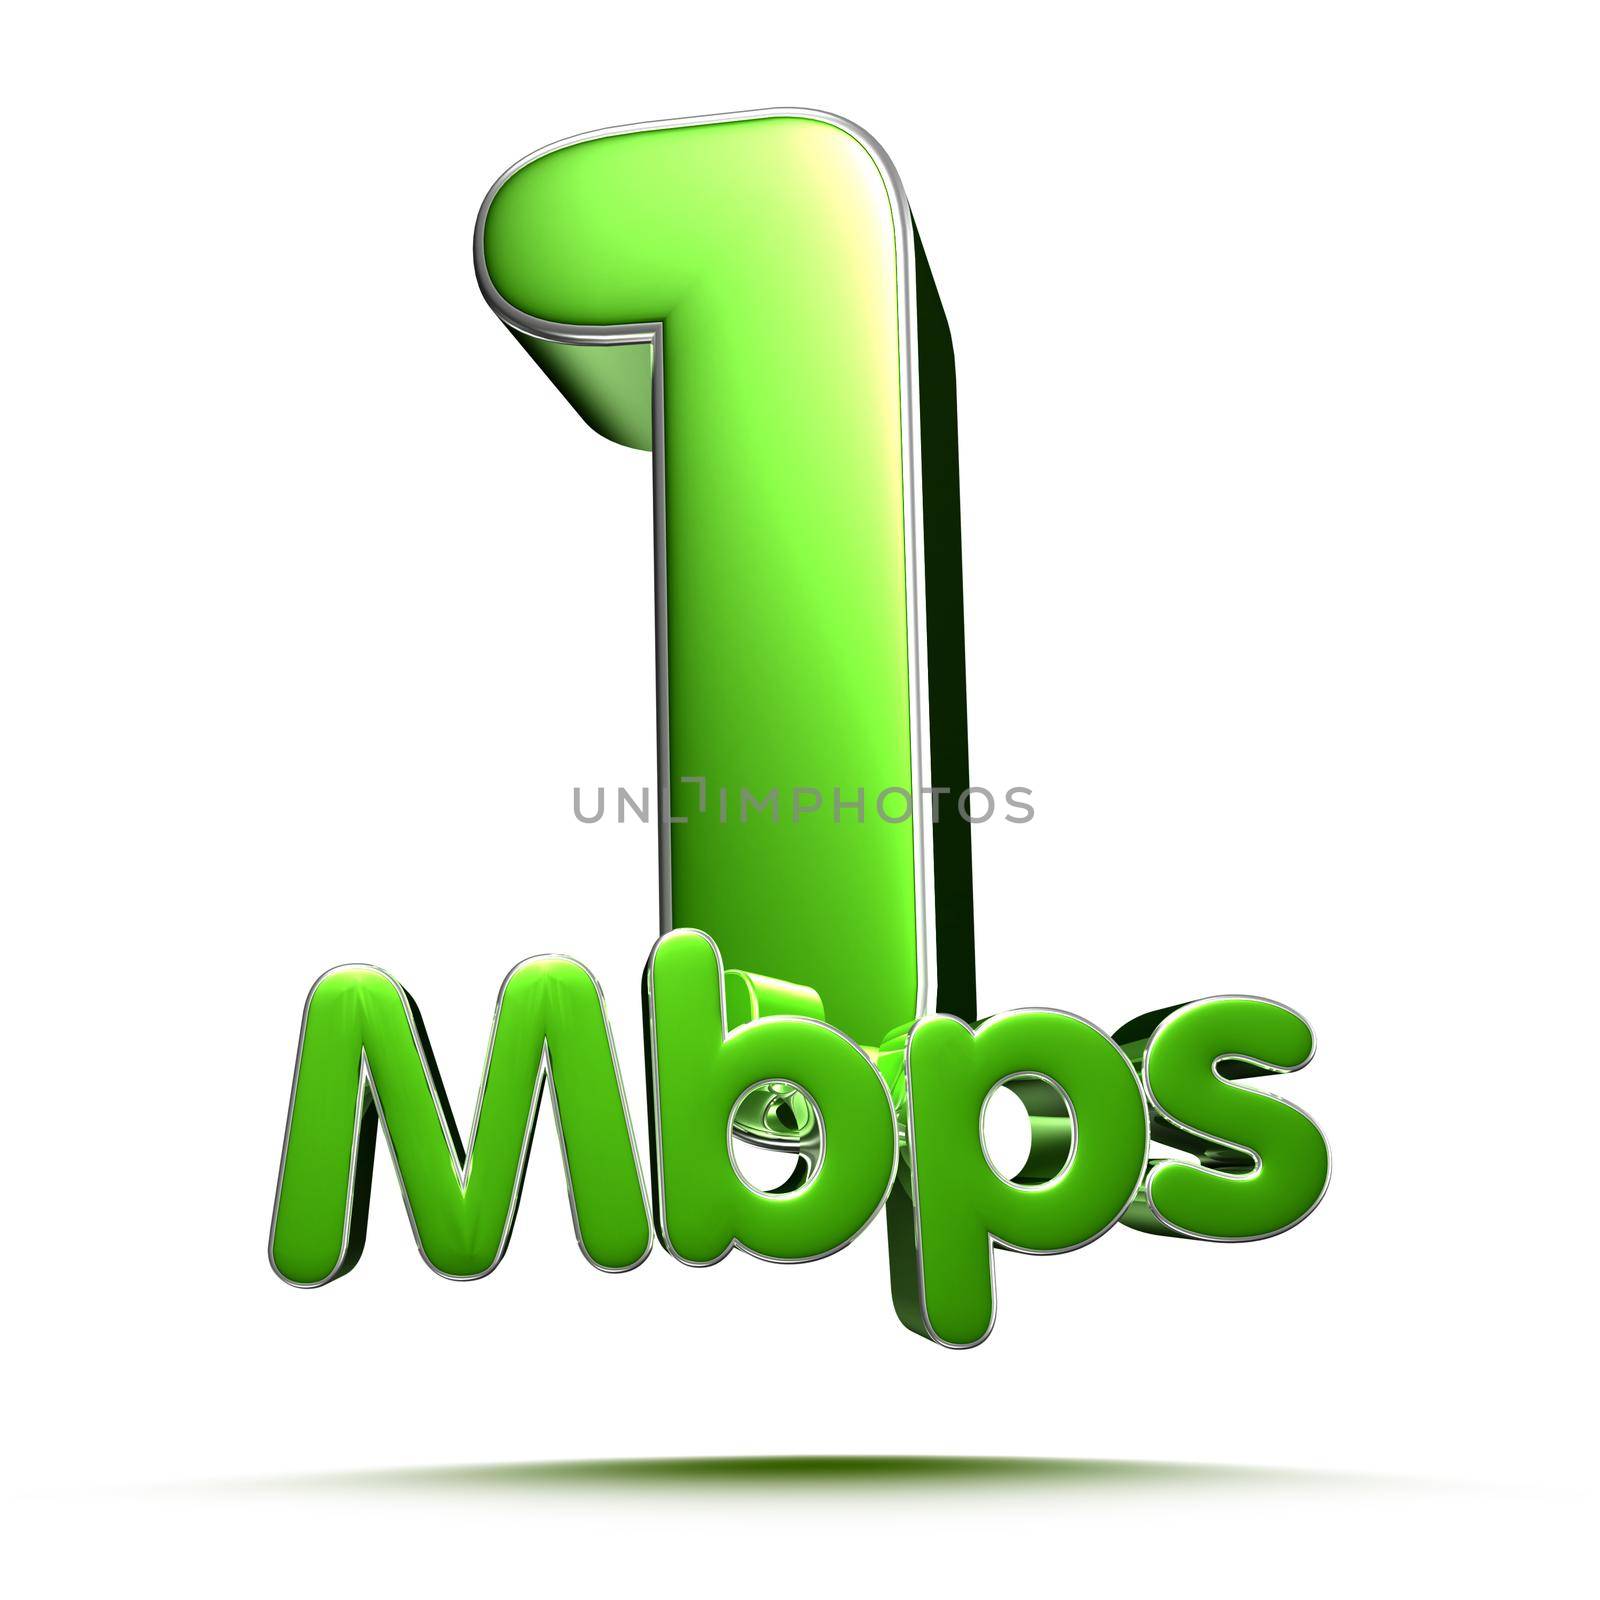 1 Mbps green 3D illustration on white background with clipping path. by thitimontoyai